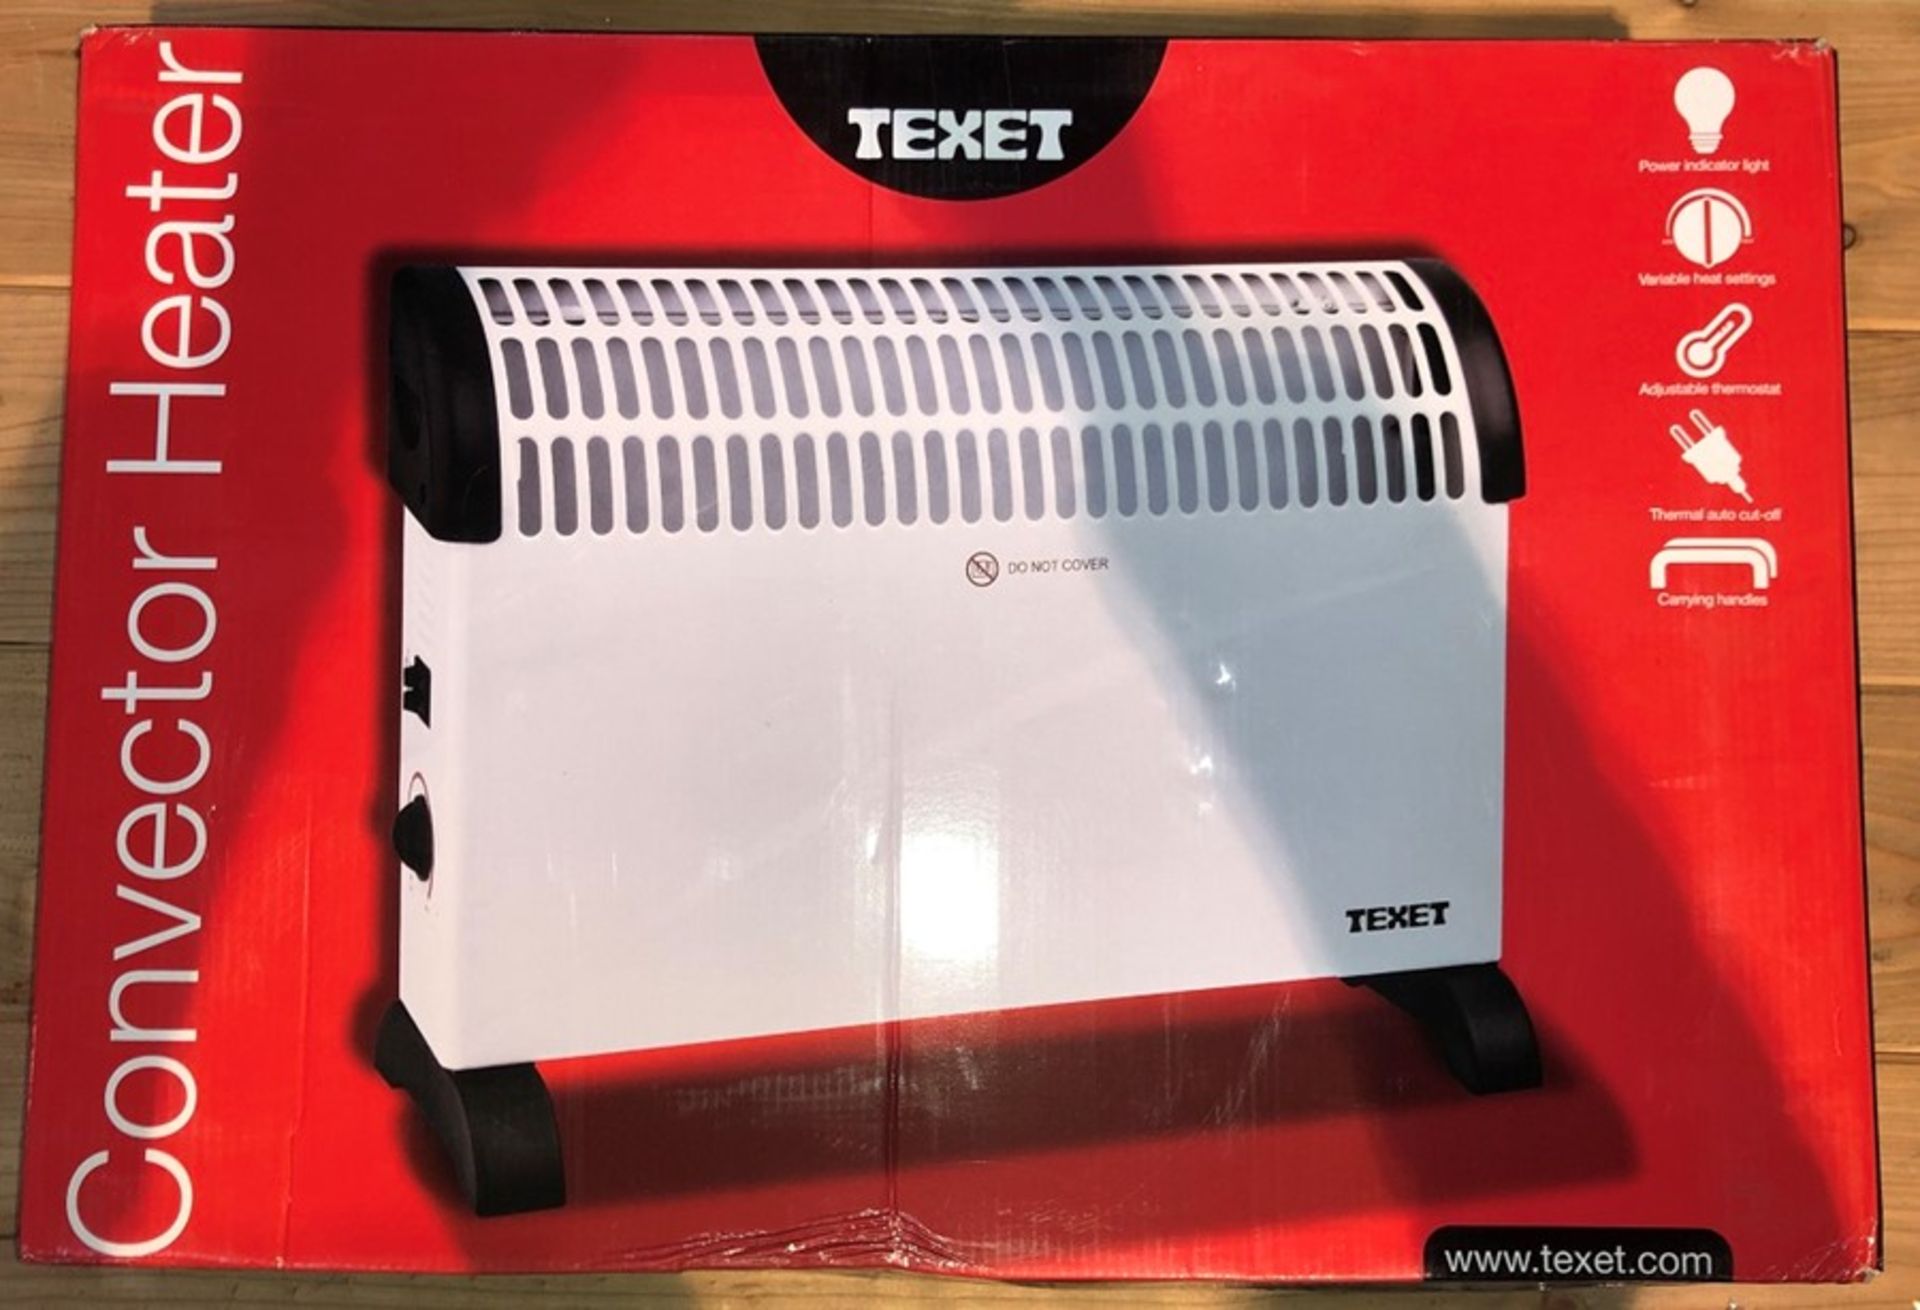 1 BOXED TEXET CONVECTOR HEATER / RRP £30.96 (PUBLIC VIEWING AVAILABLE)